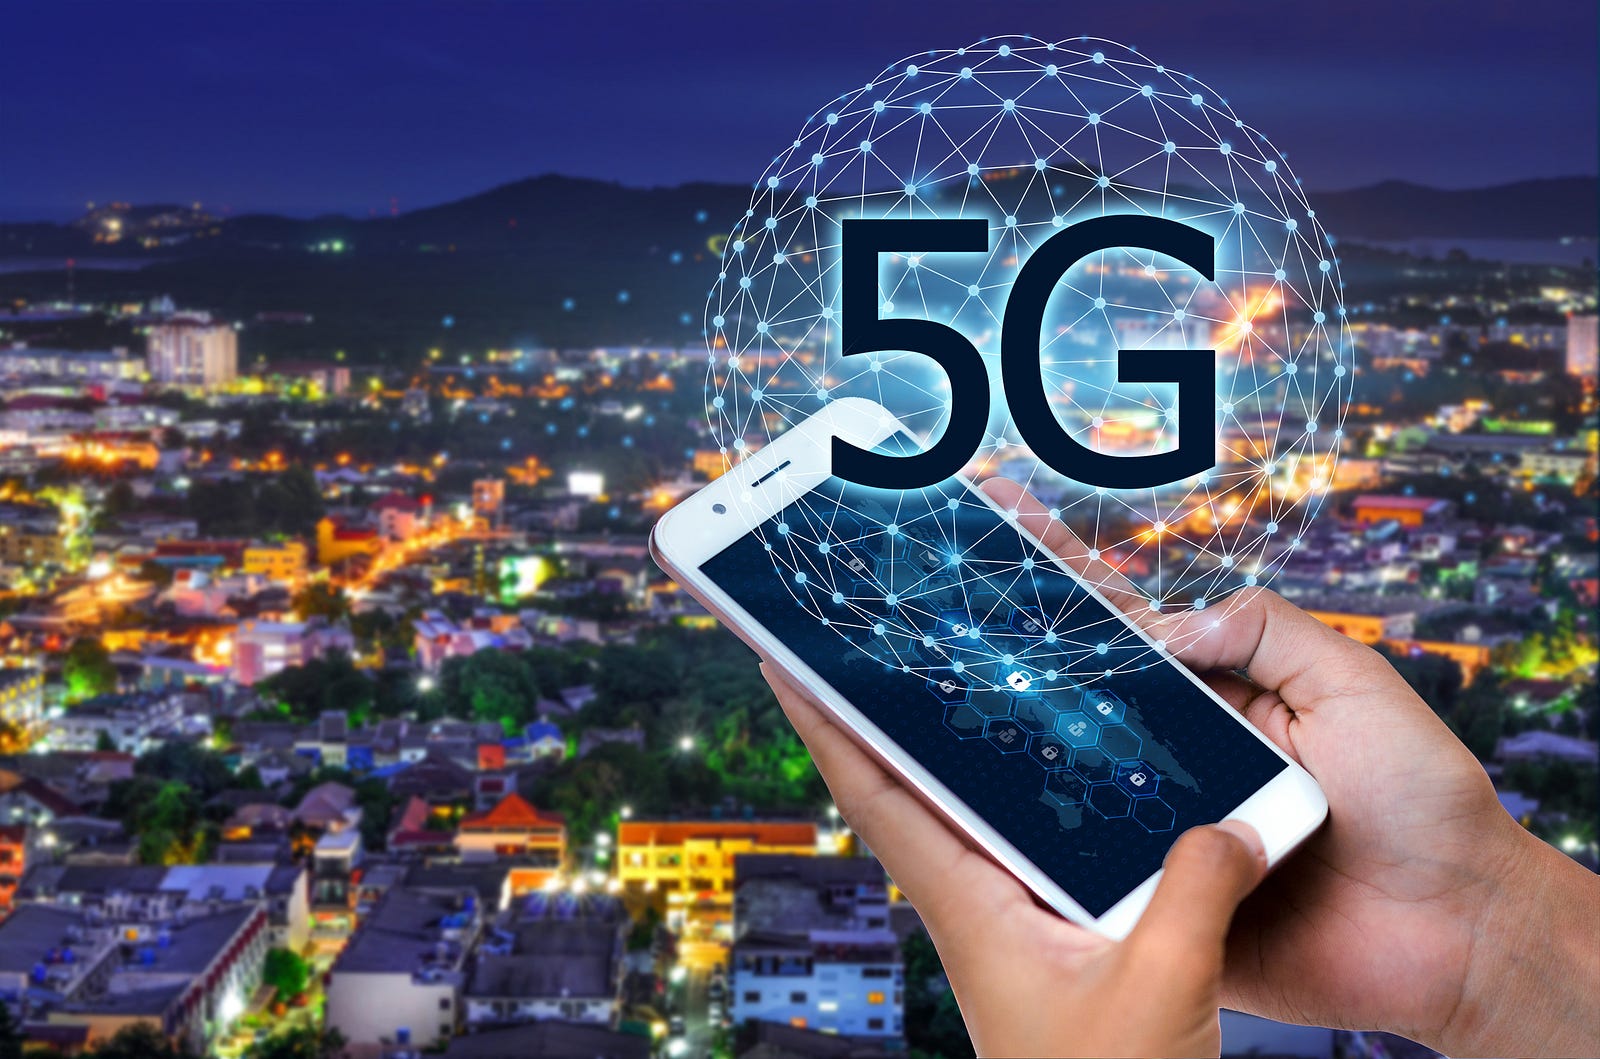 Wireless Infrastructure Evolves as Industry Moves Toward 5G